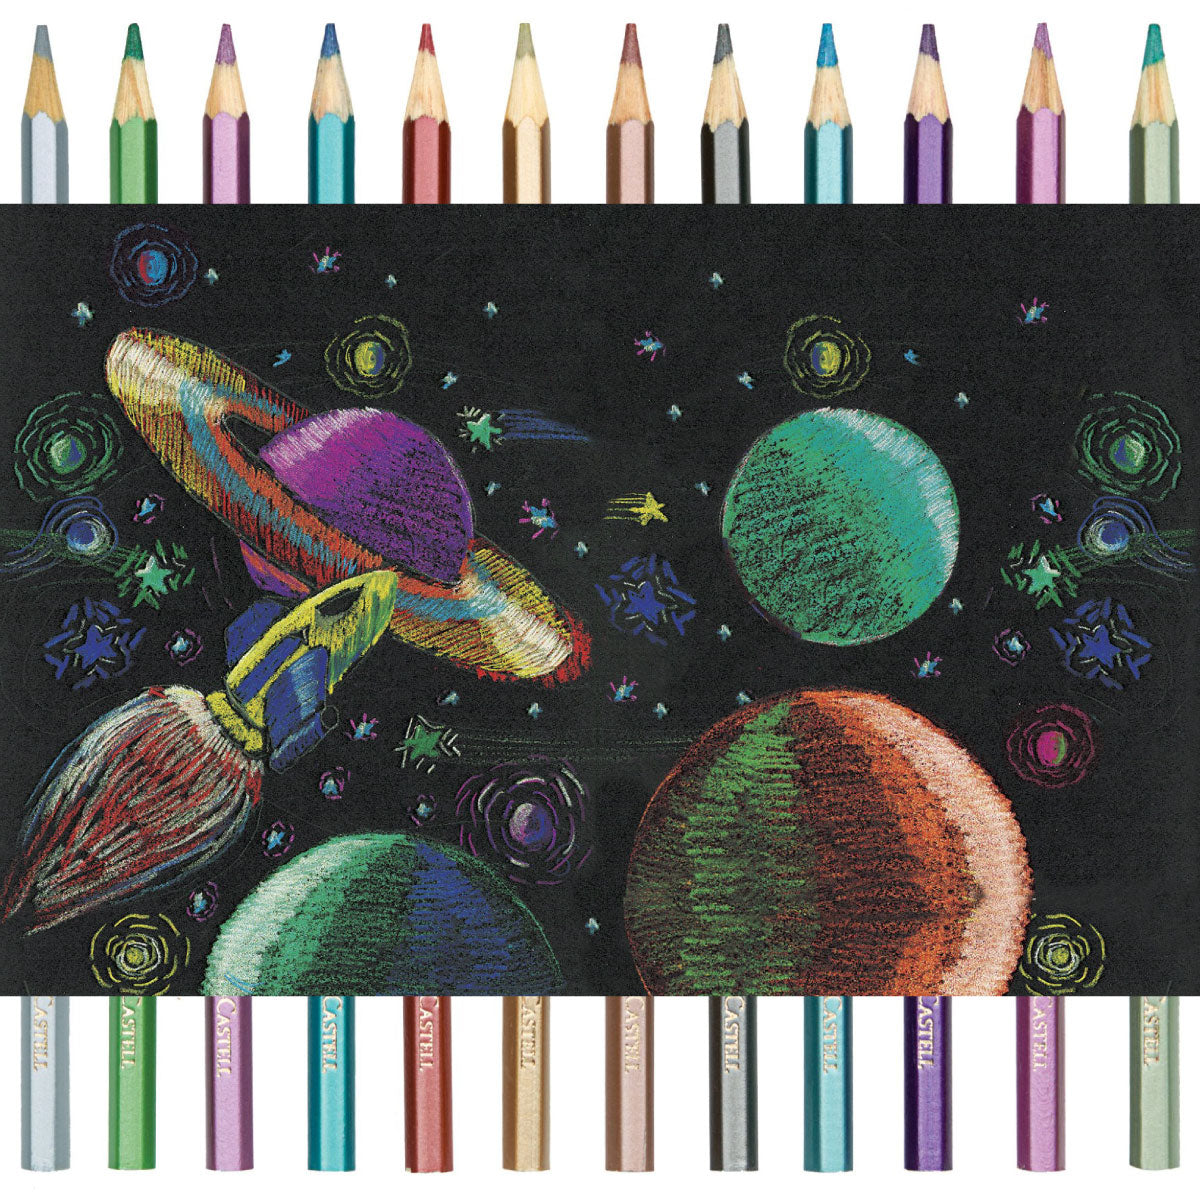 Faber-Castell 12 Metallic Colored EcoPencils